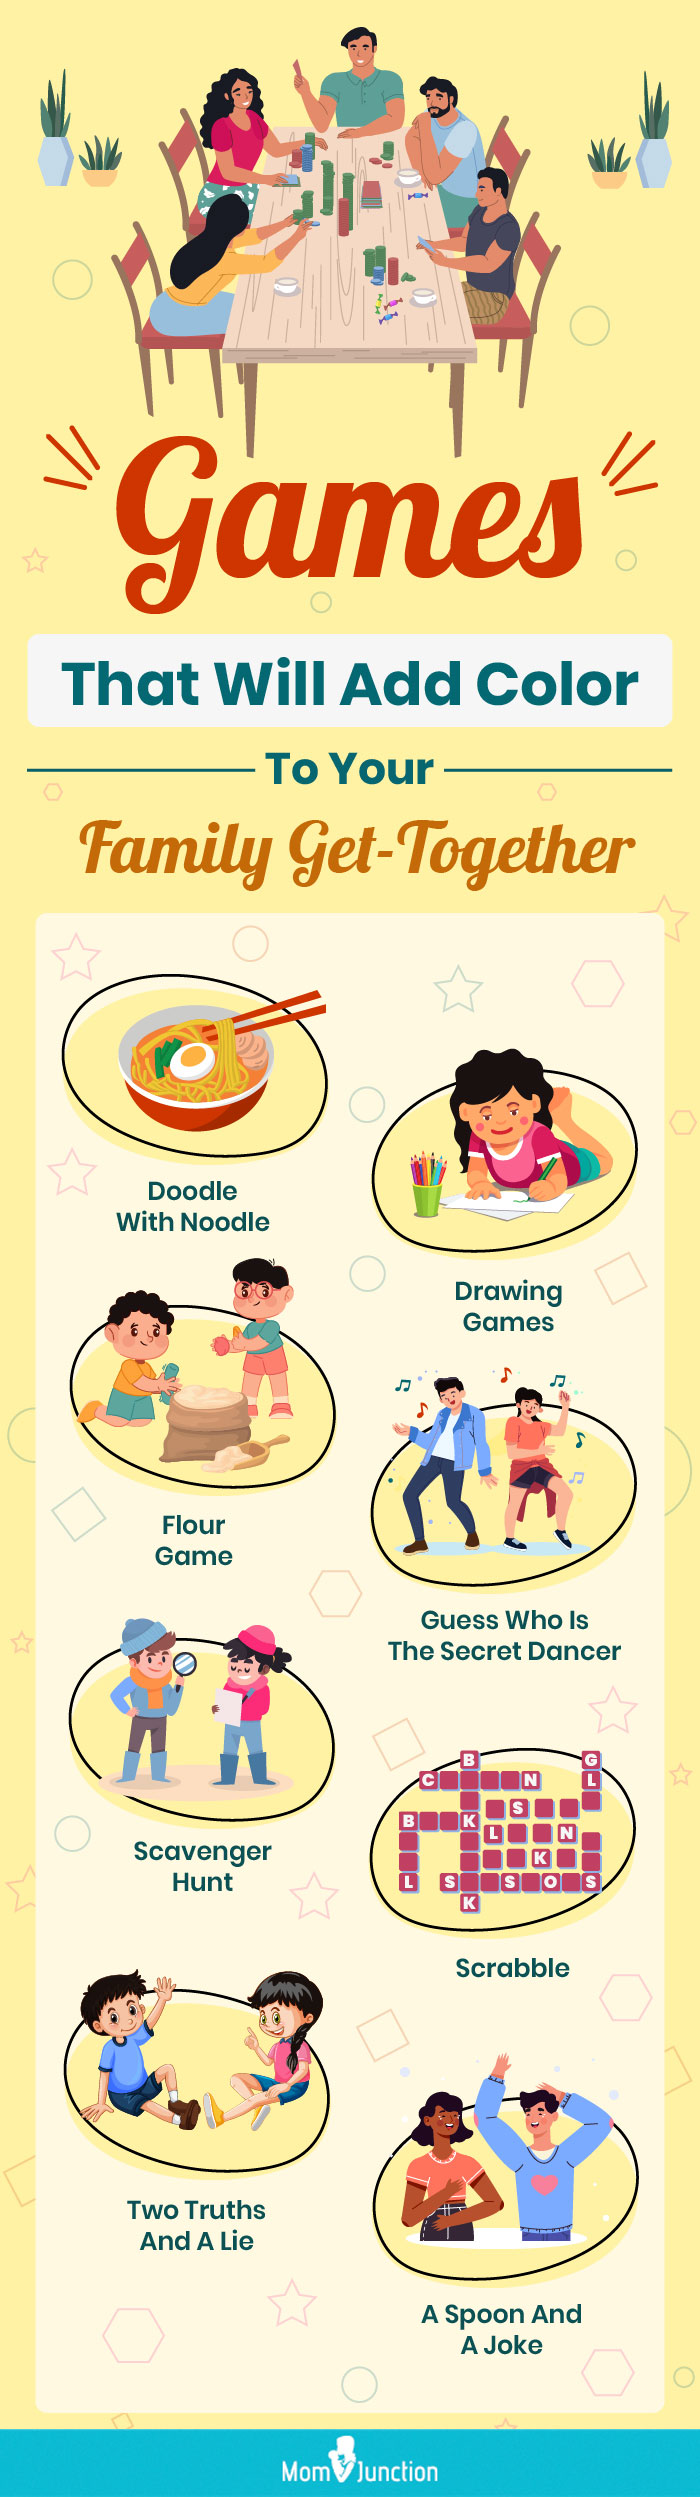 games that will add color to your family get-together (infographic)